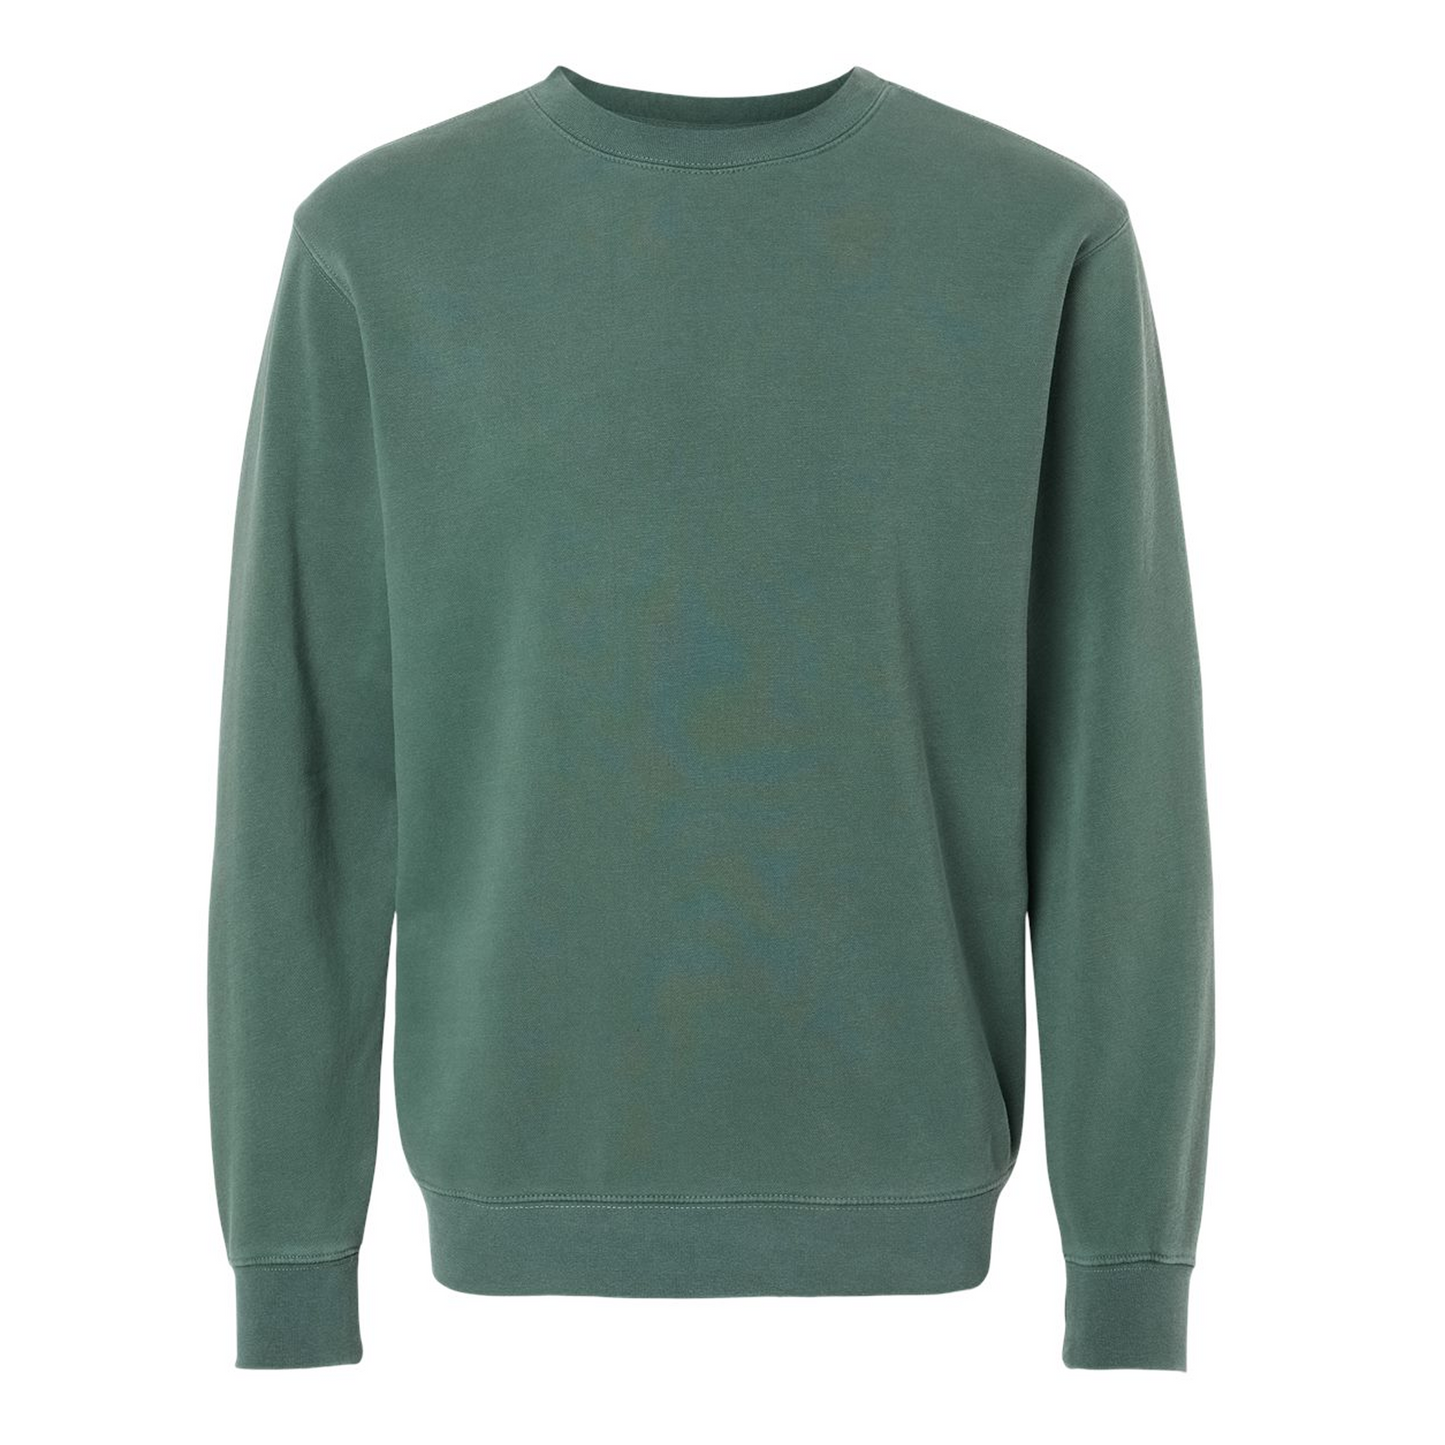 Independent Trading Co. - Midweight Pigment-Dyed Crewneck Sweatshirt - PRM3500